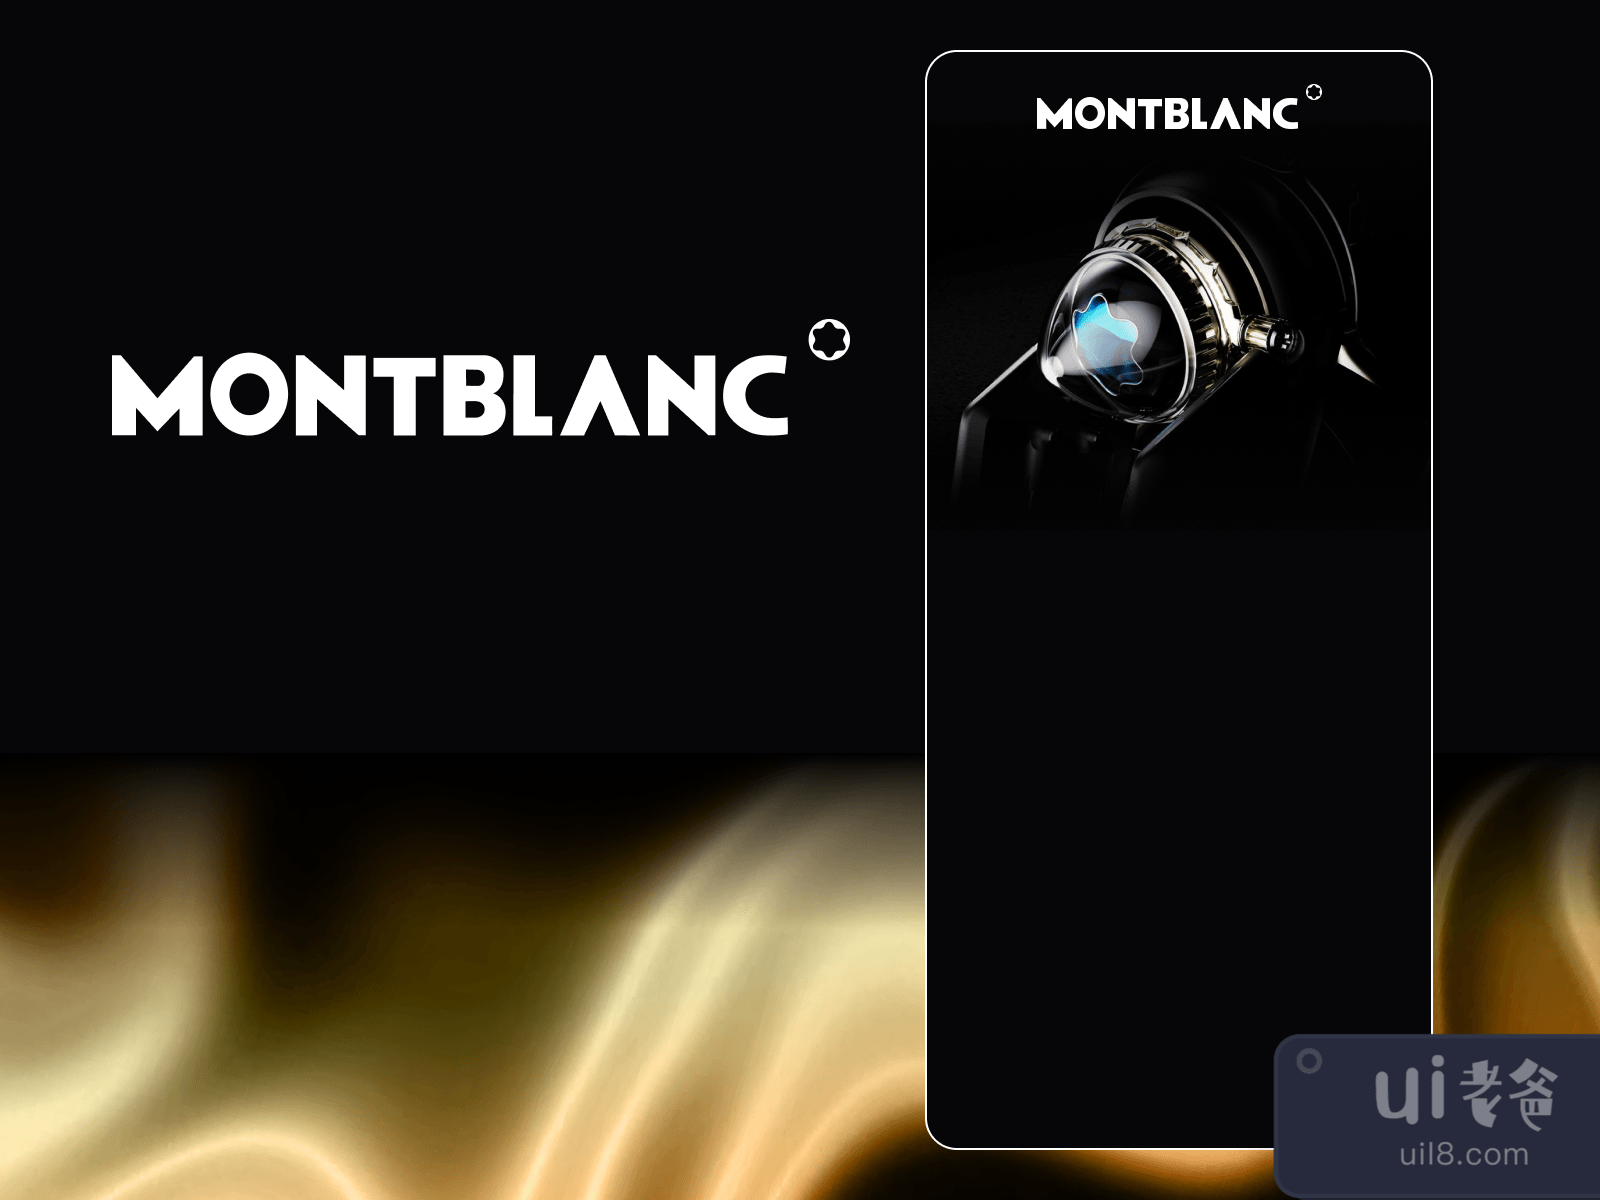 Montblanc  Motorcycle Mobile App for Figma and Adobe XD No 3